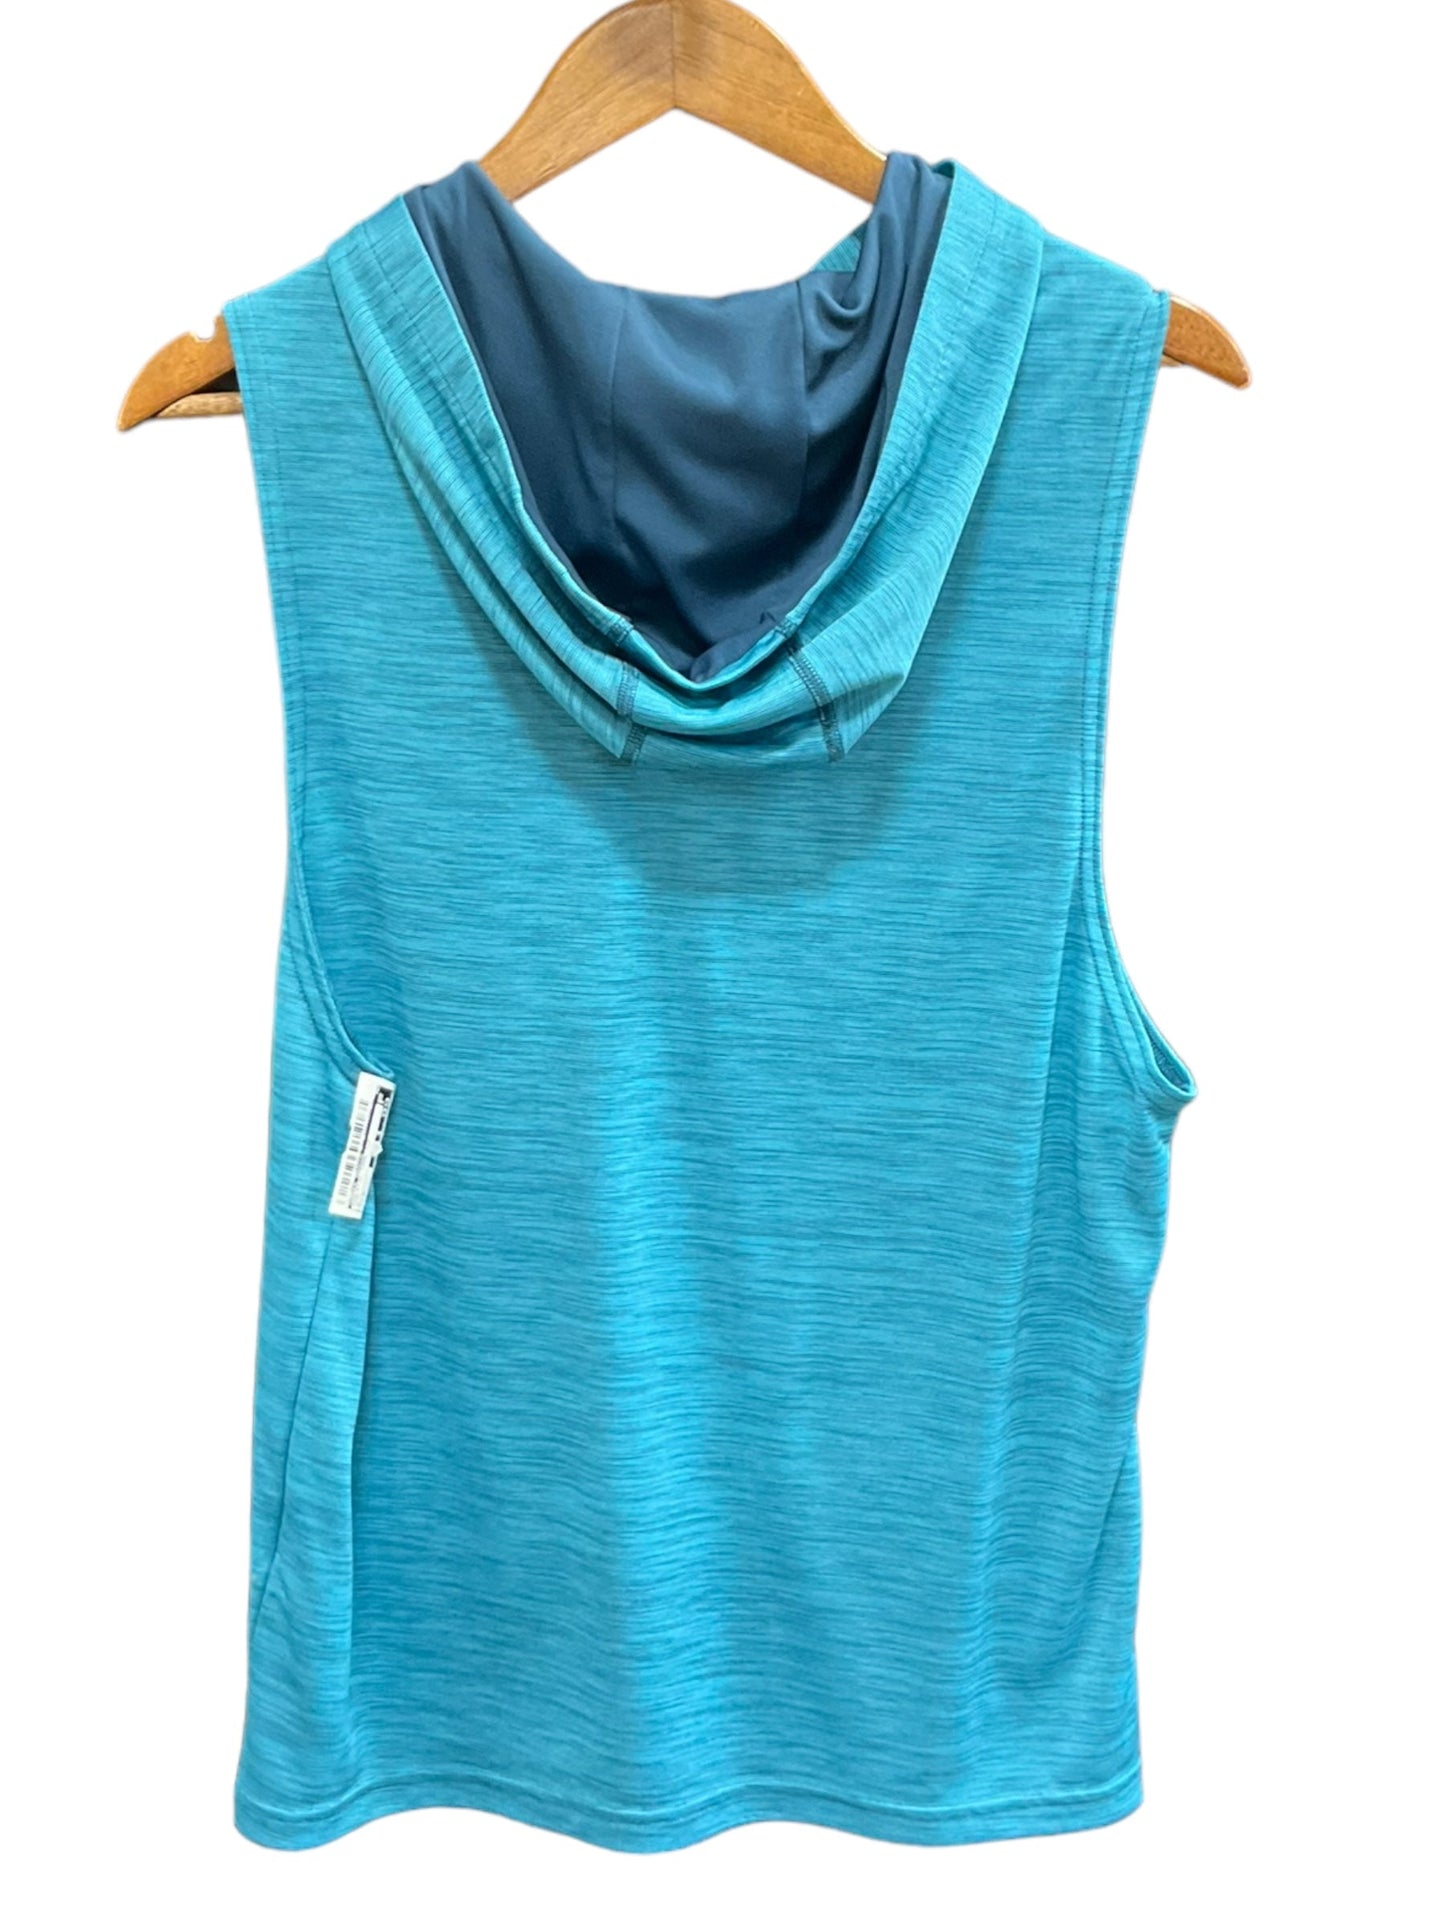 Teal Athletic Tank Top Under Armour, Size M